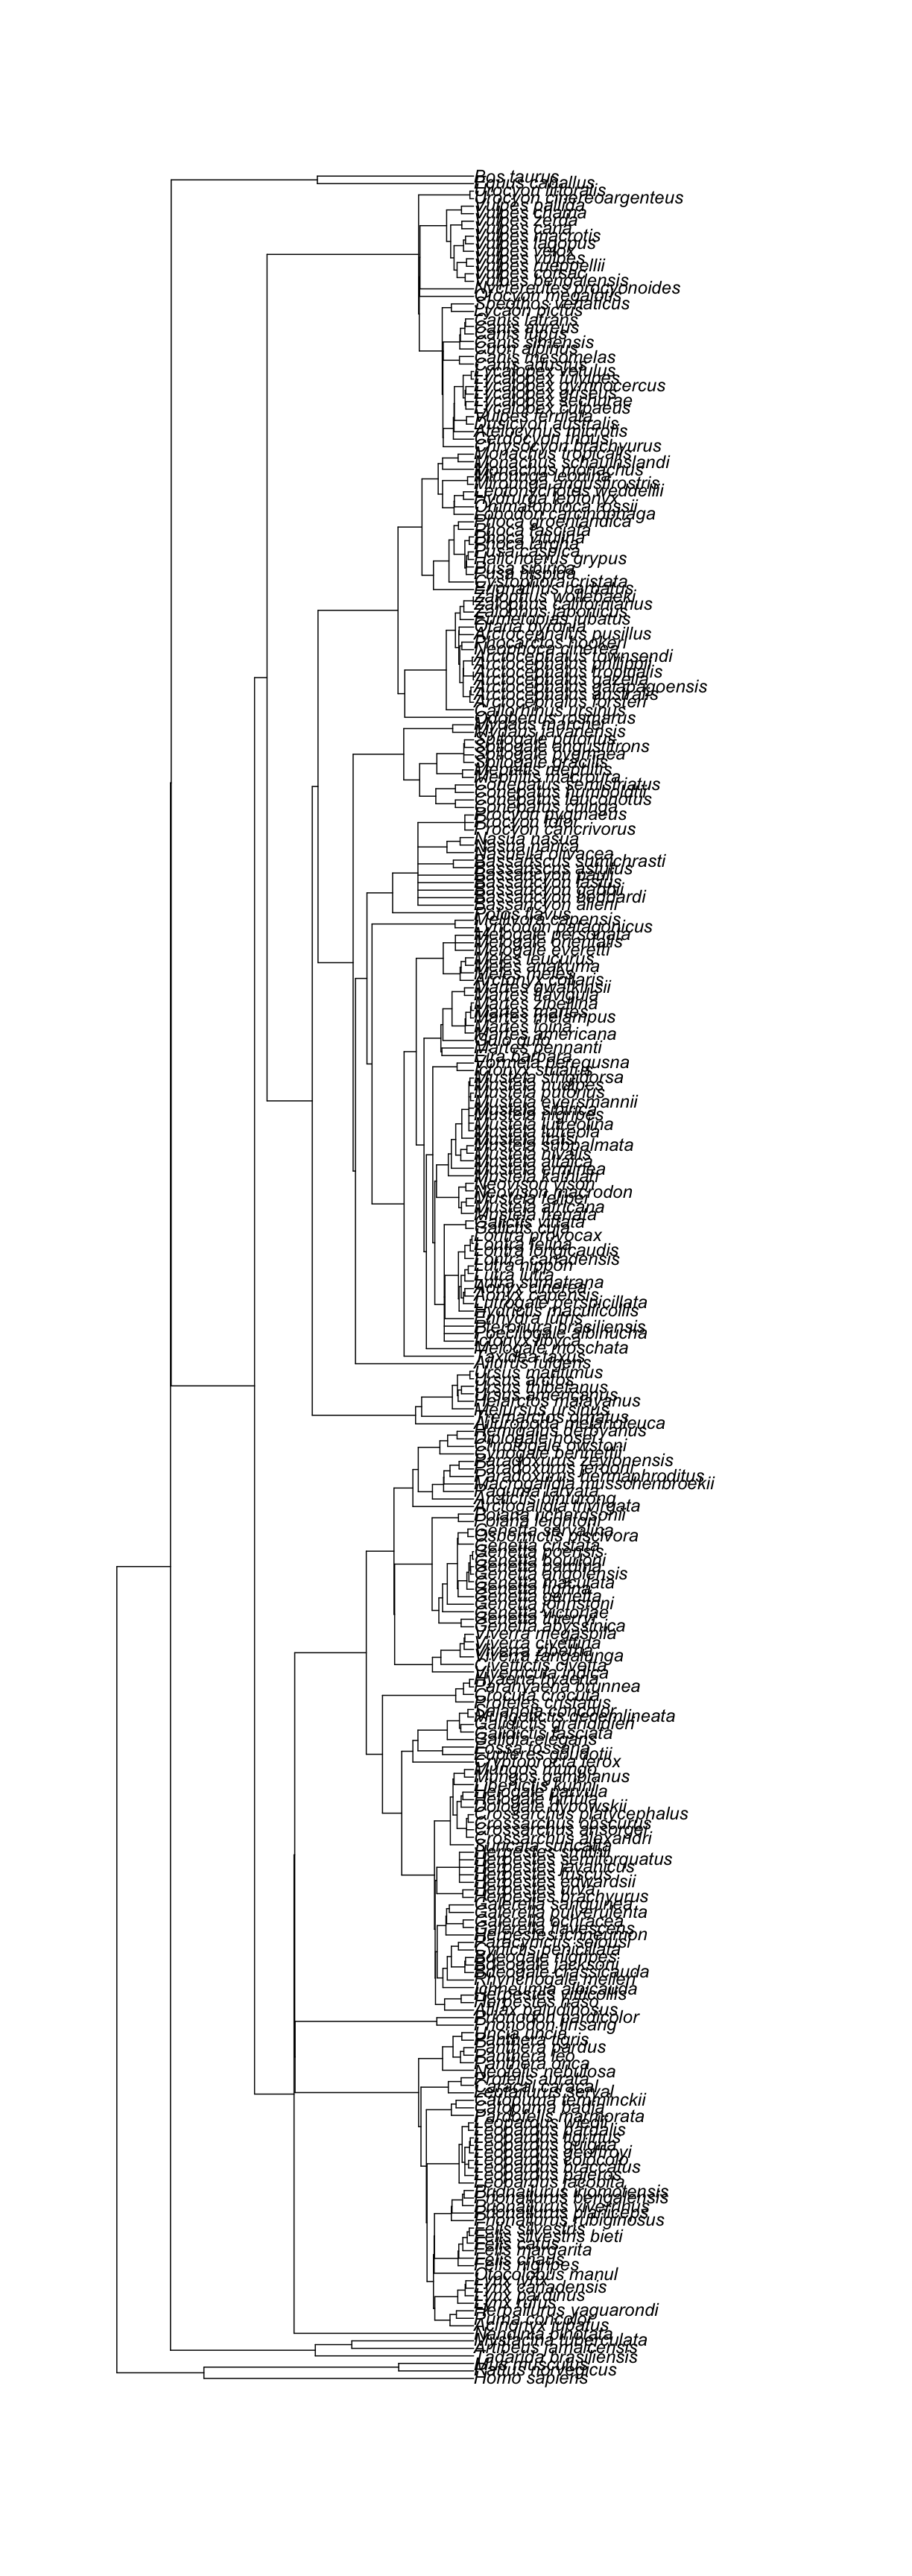 plot of chunk canis-support-trees